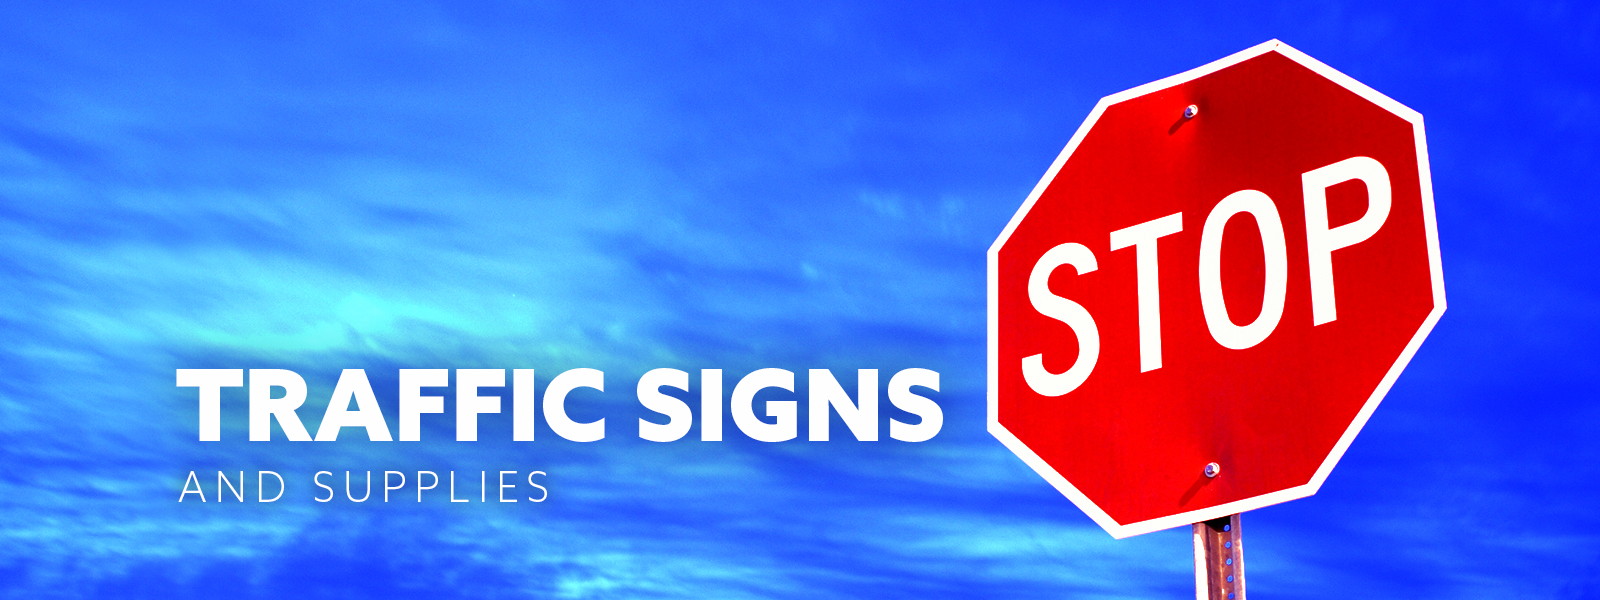 Traffic Signs and Supplies